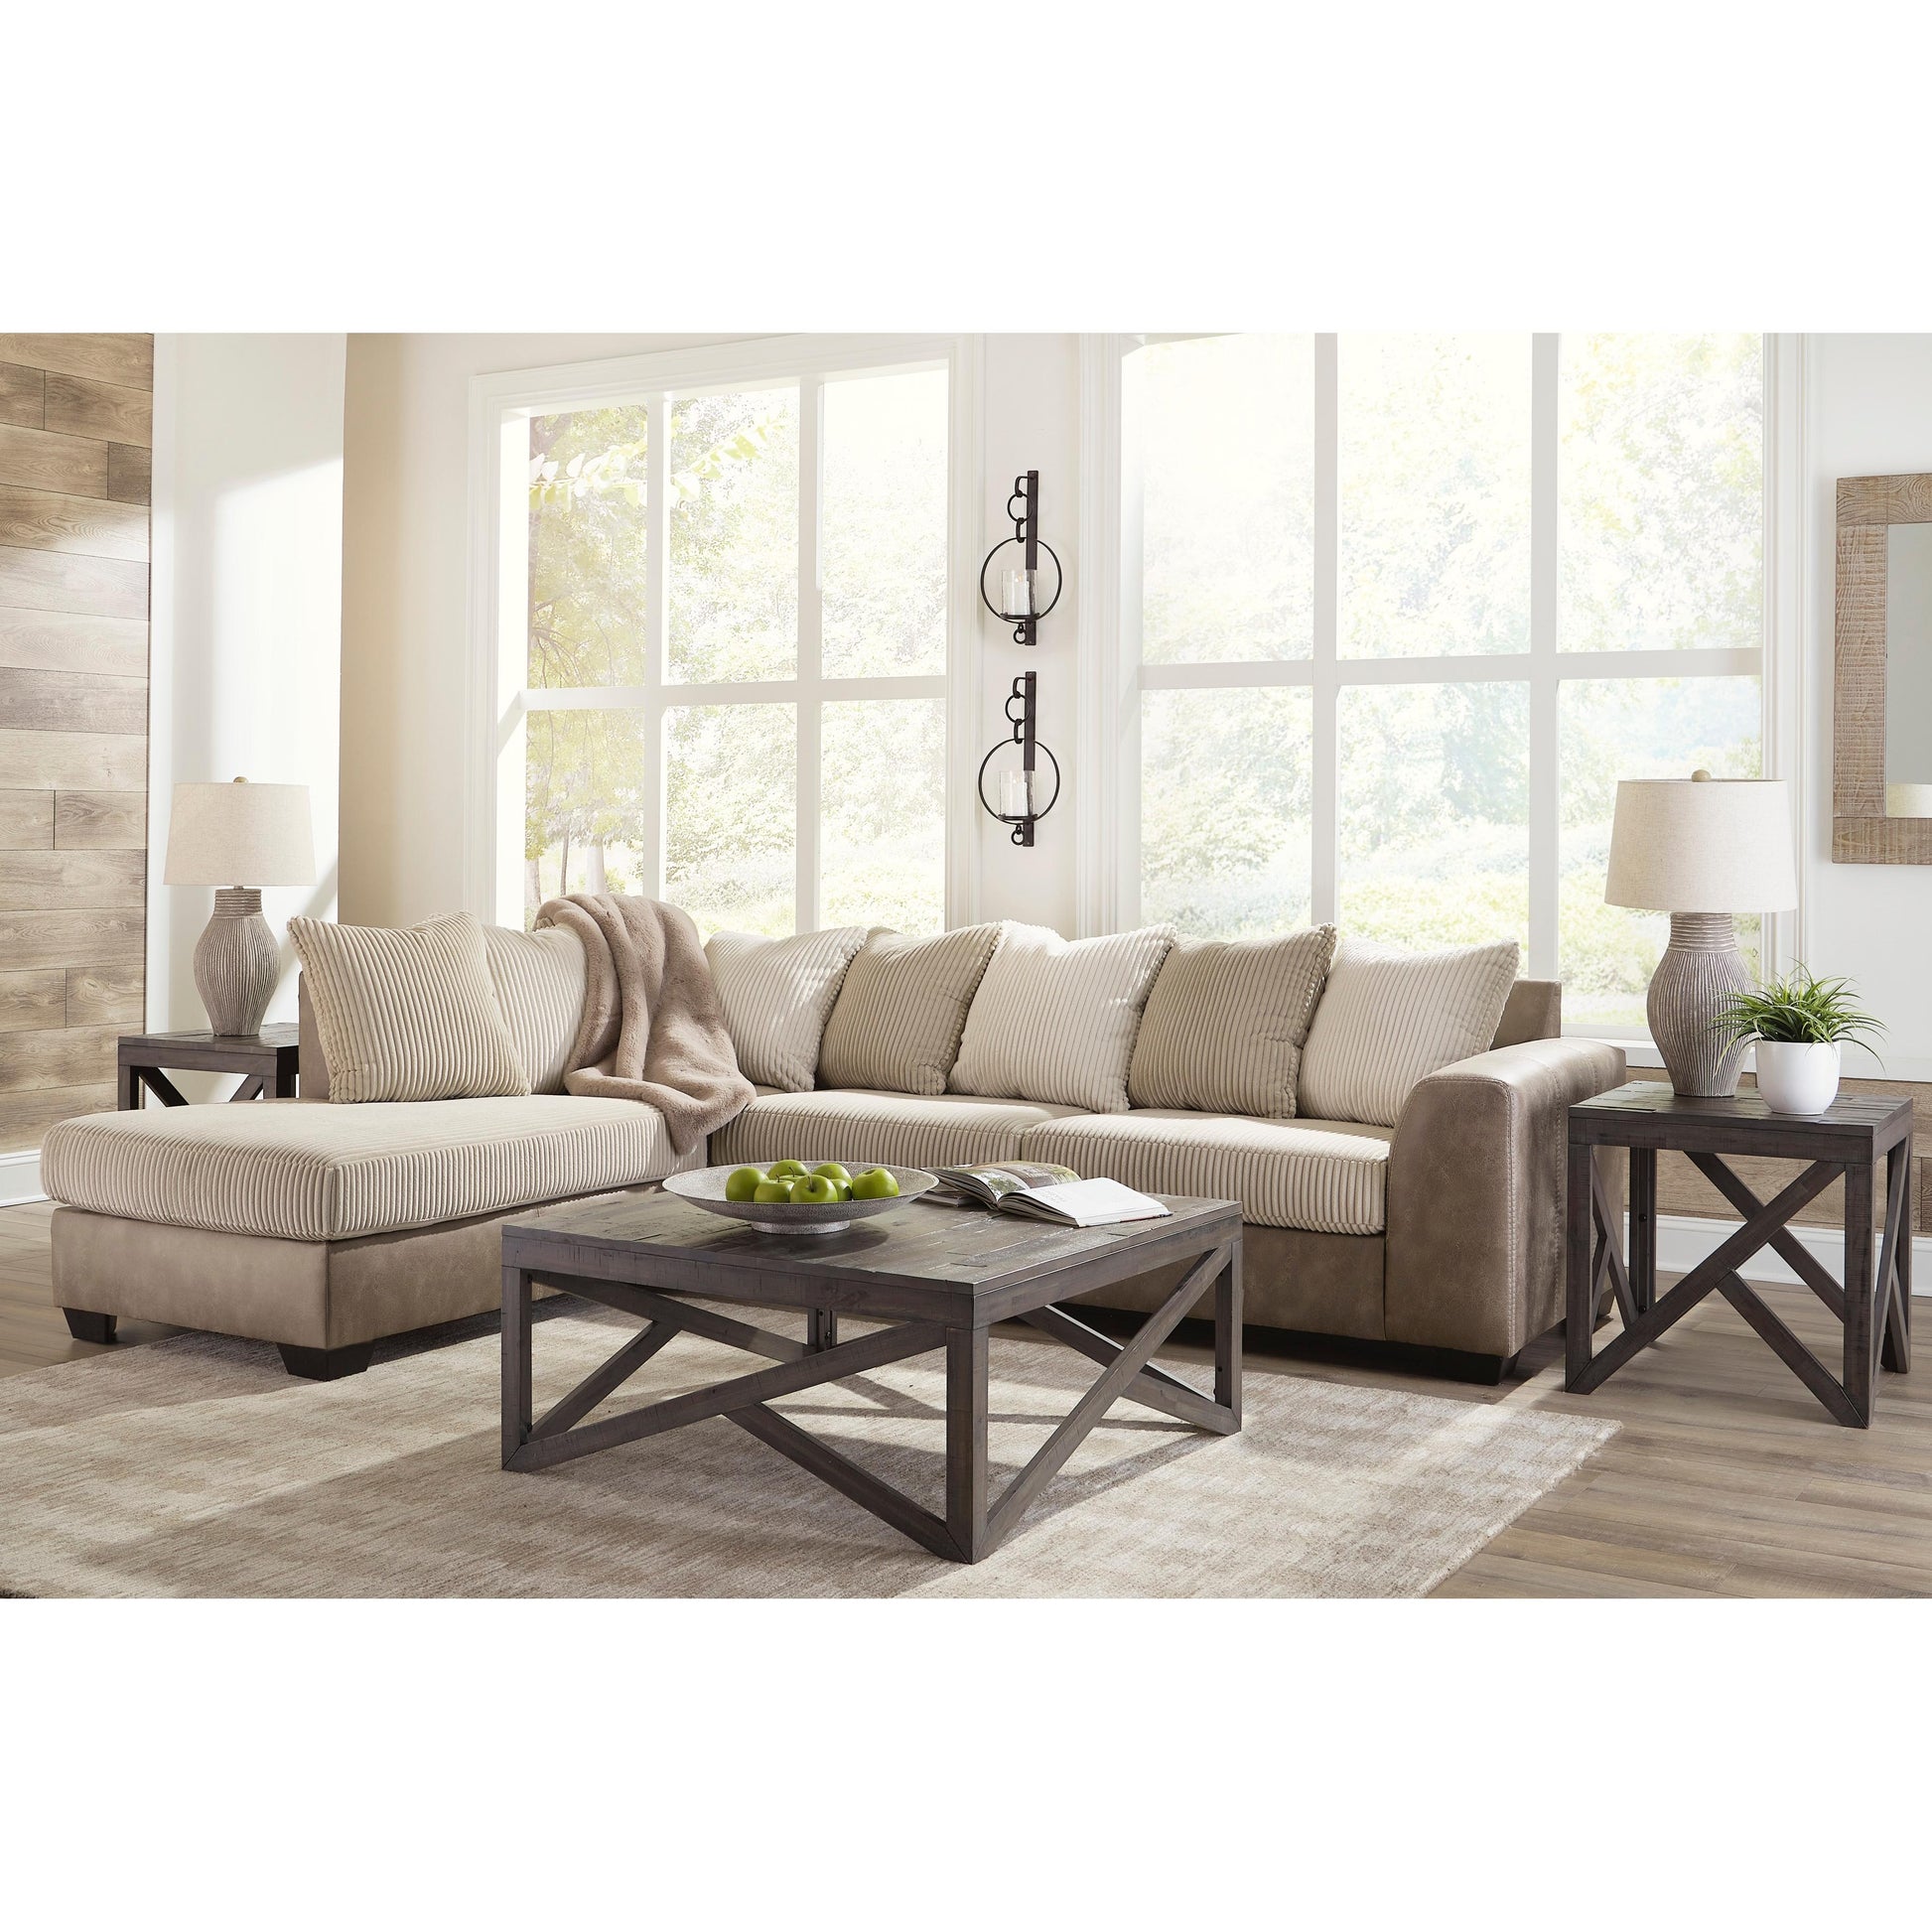 Signature Design by Ashley Keskin Fabric and Leather Look 2 pc Sectional 1840316/1840367 IMAGE 4